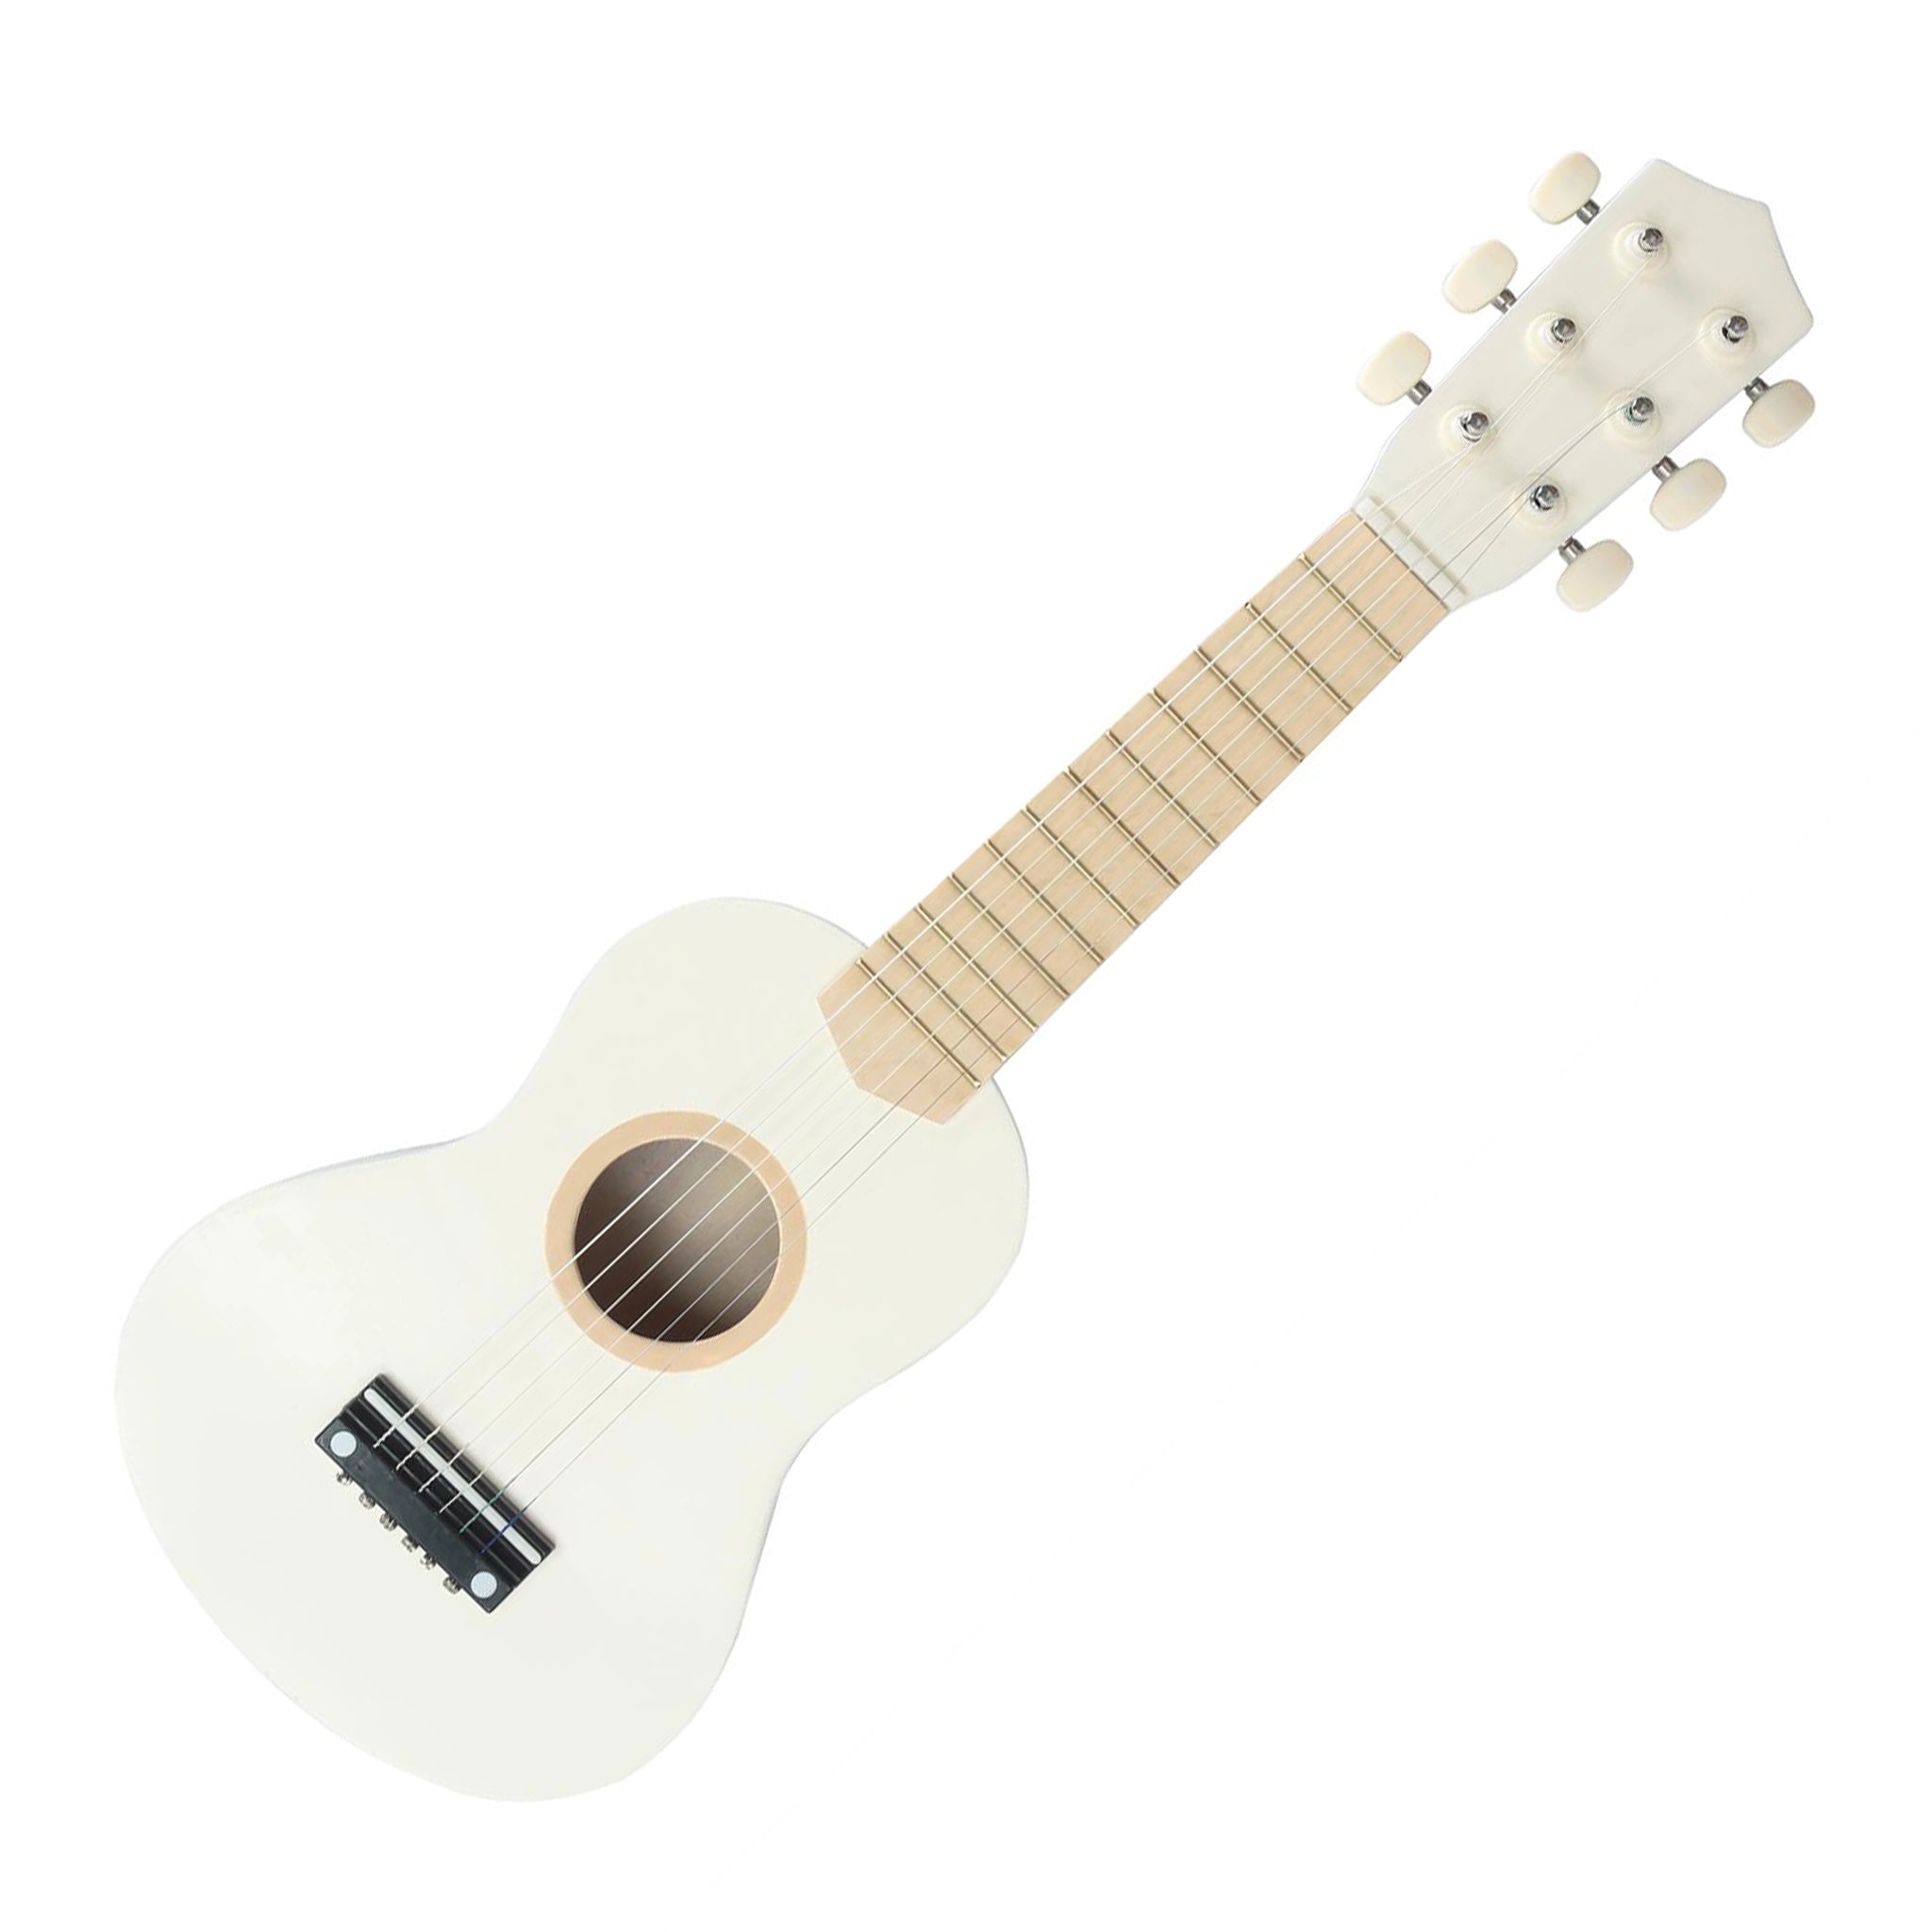 On a white background is an ivory toy guitar with 6 strings. 